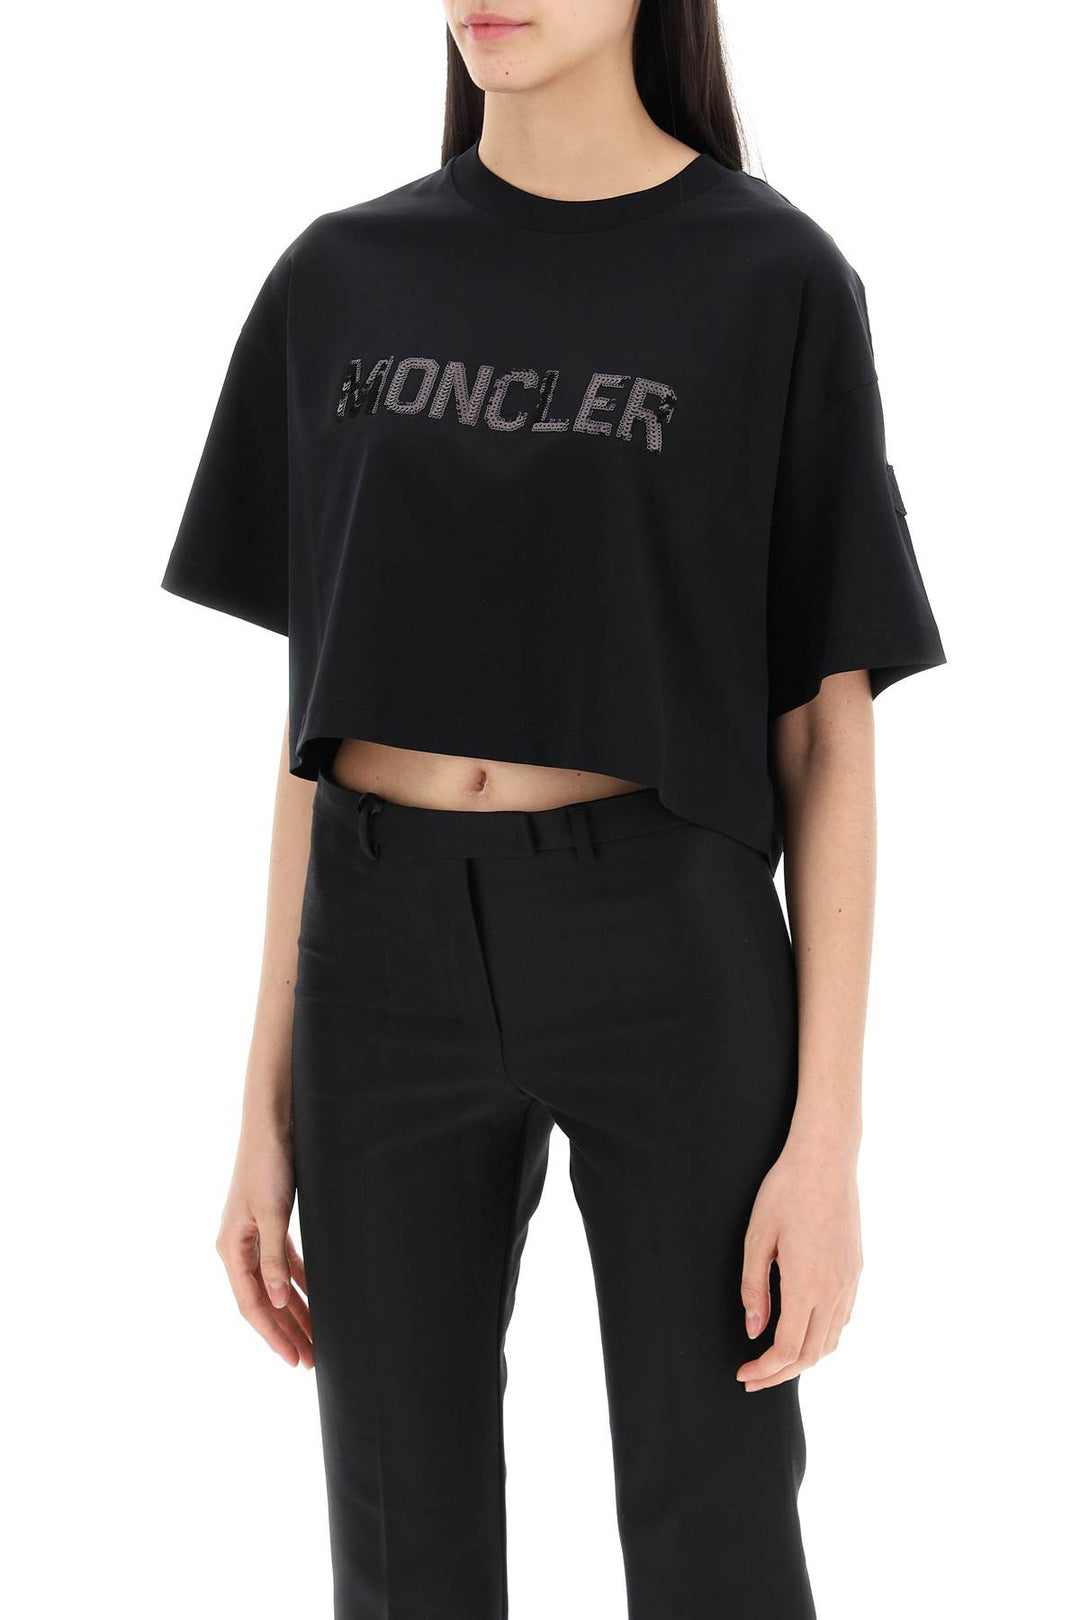 Moncler Cropped T Shirt With Sequin Logo   Nero